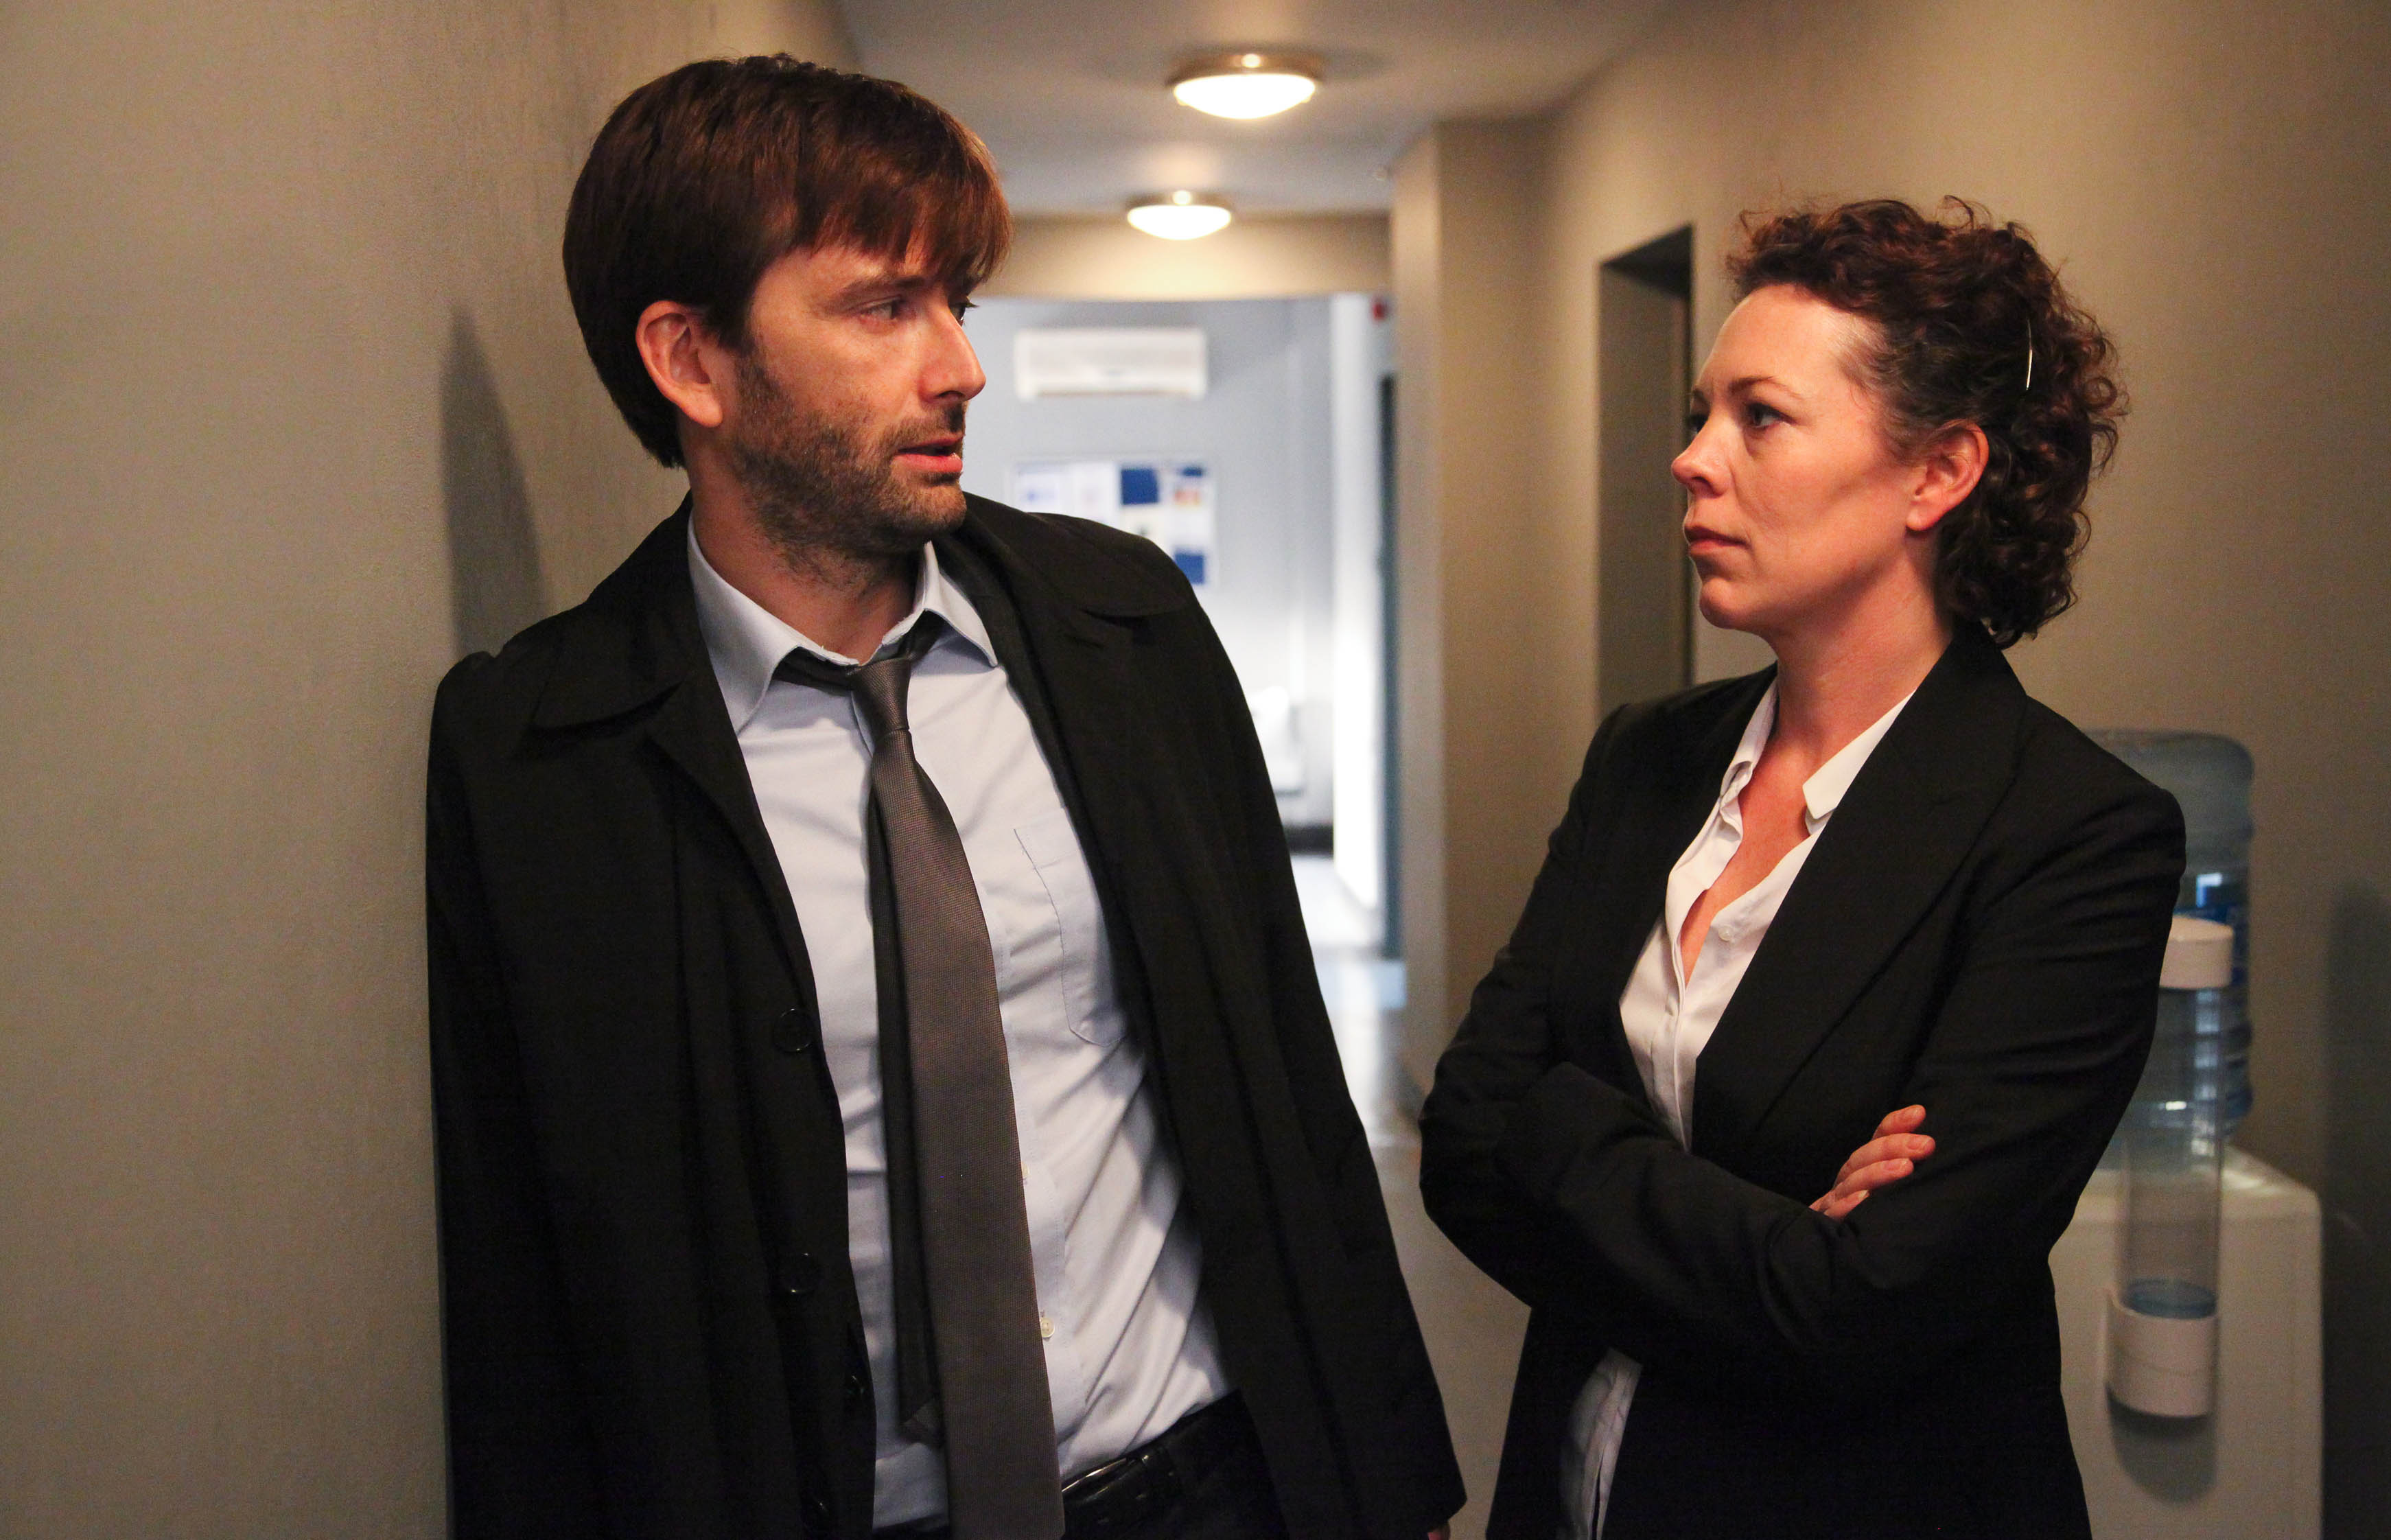 David Tennant opposite British co-star Olivia Colman. The American version of this scene will look a bit different. (Photo: © ITV Plc)